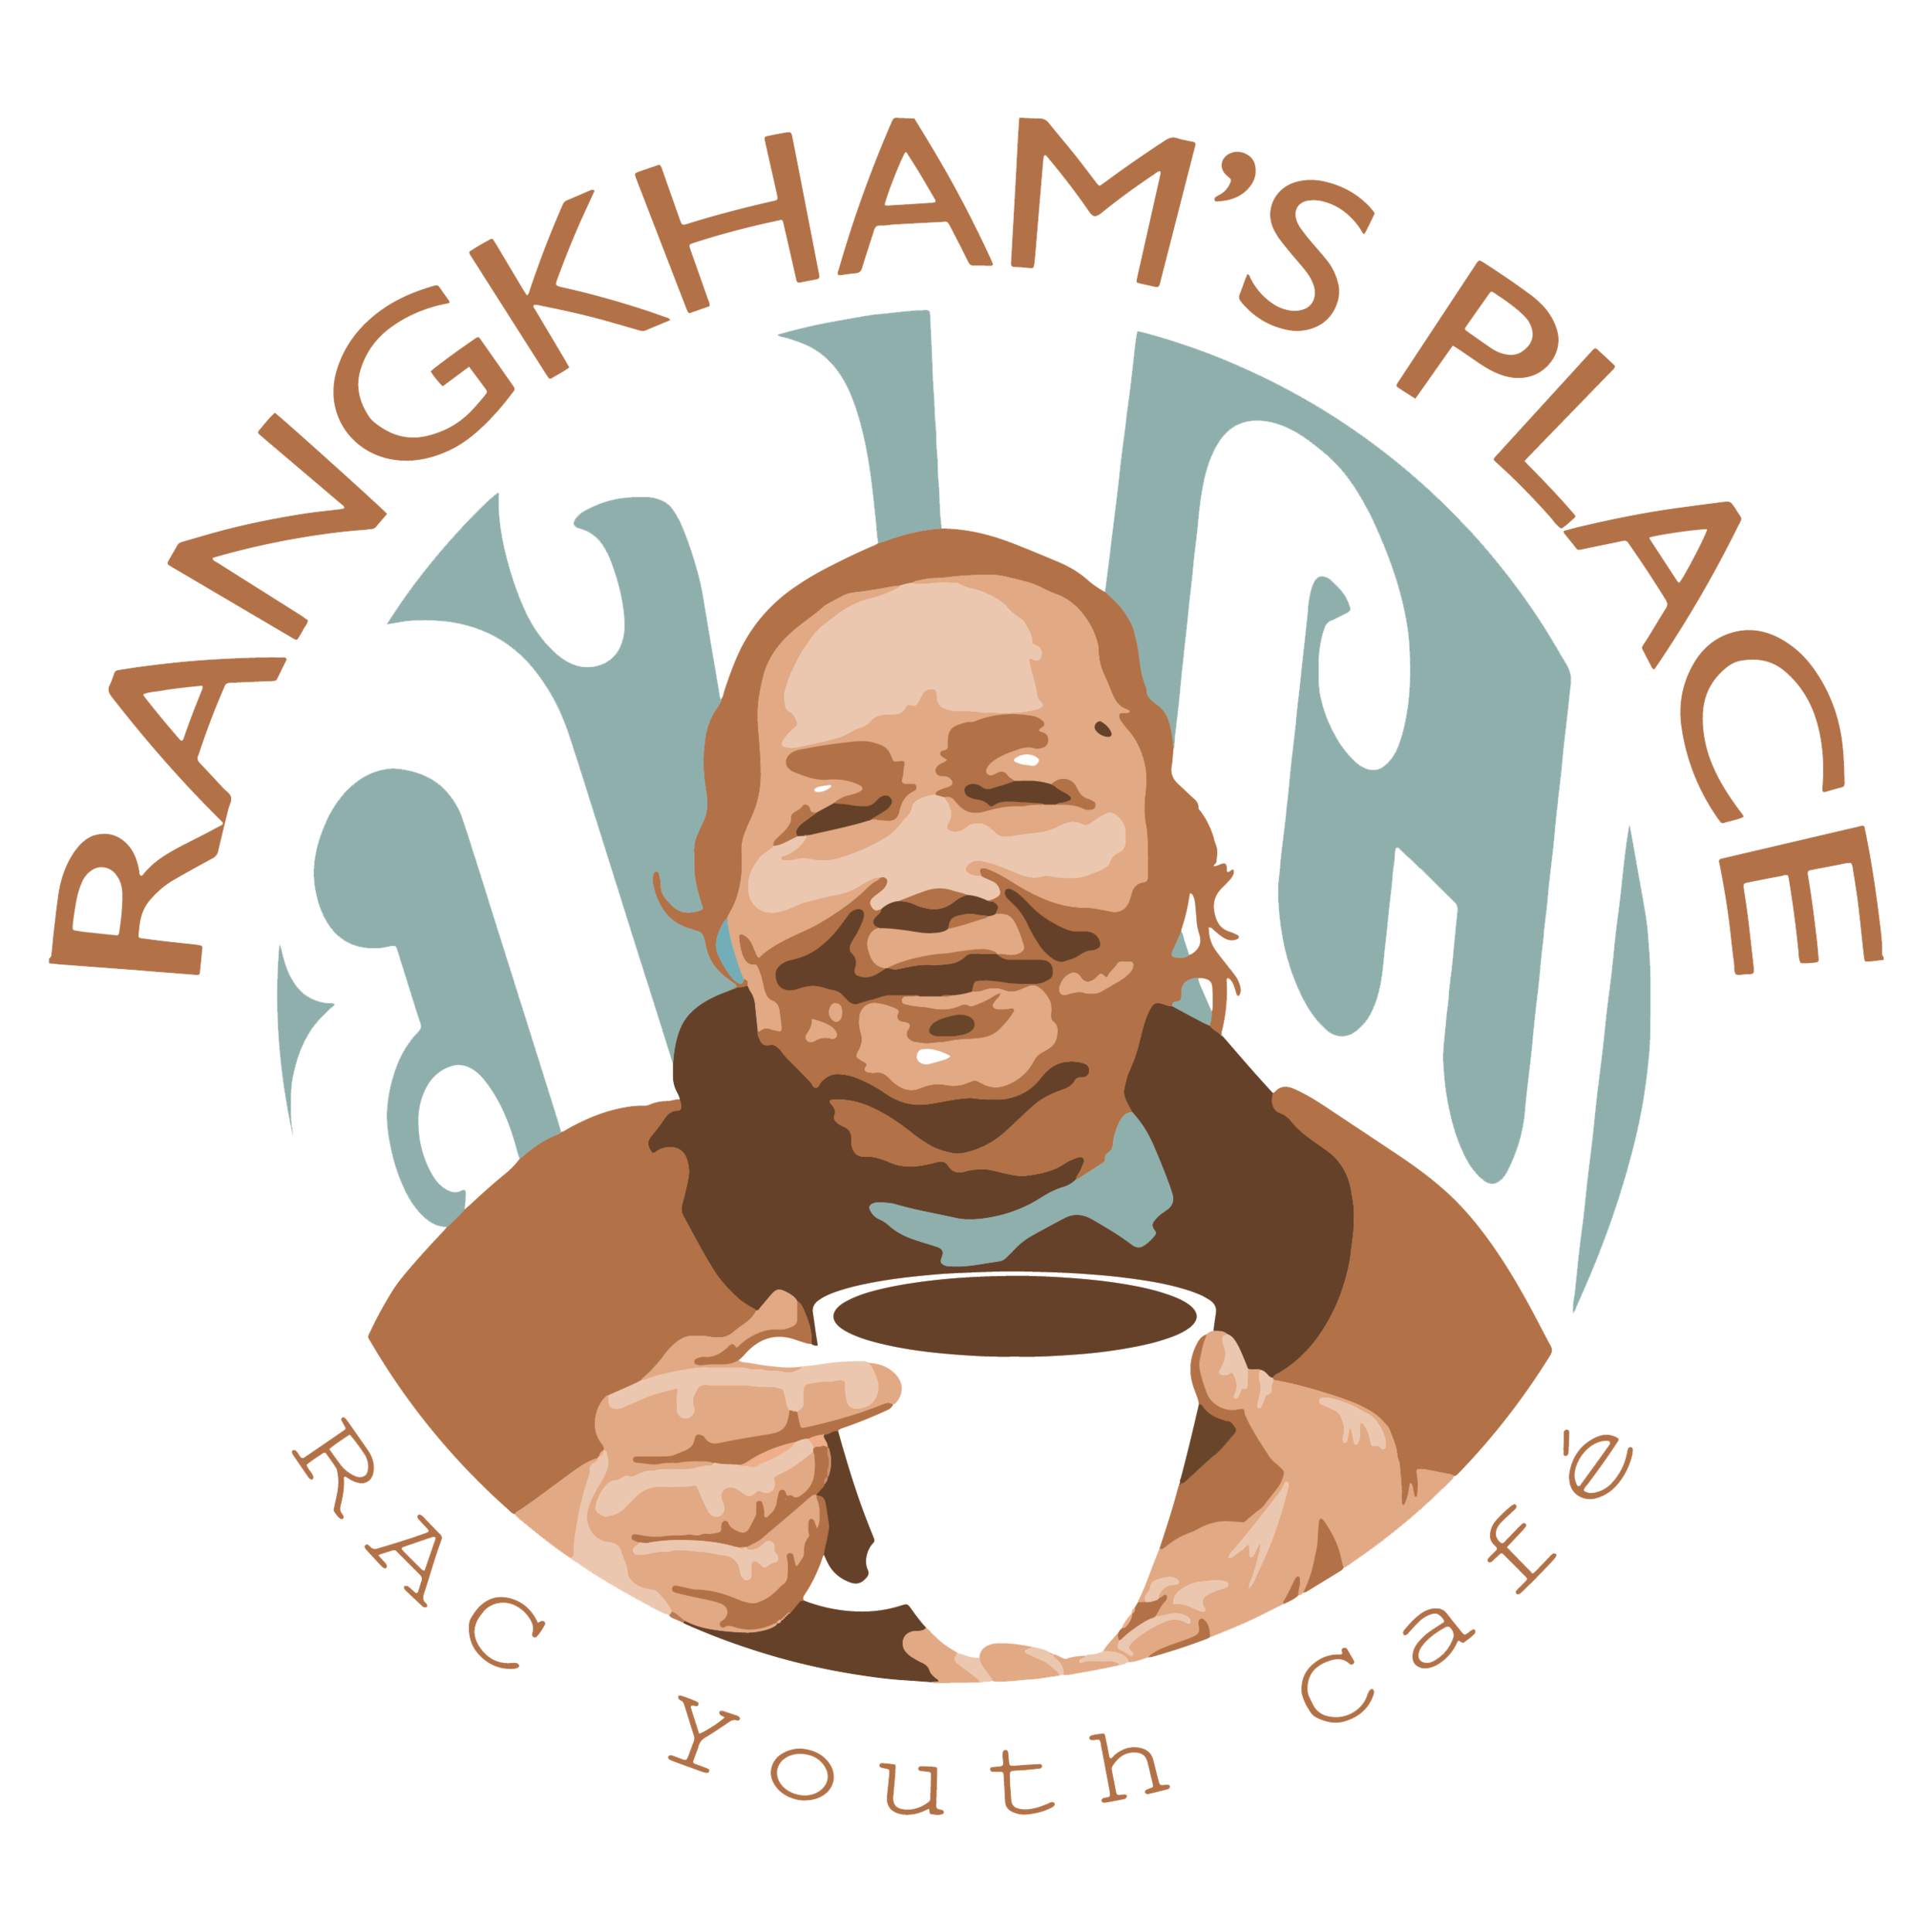 Rangkahm Logo With Text (color transparent) 72ppi-01.png